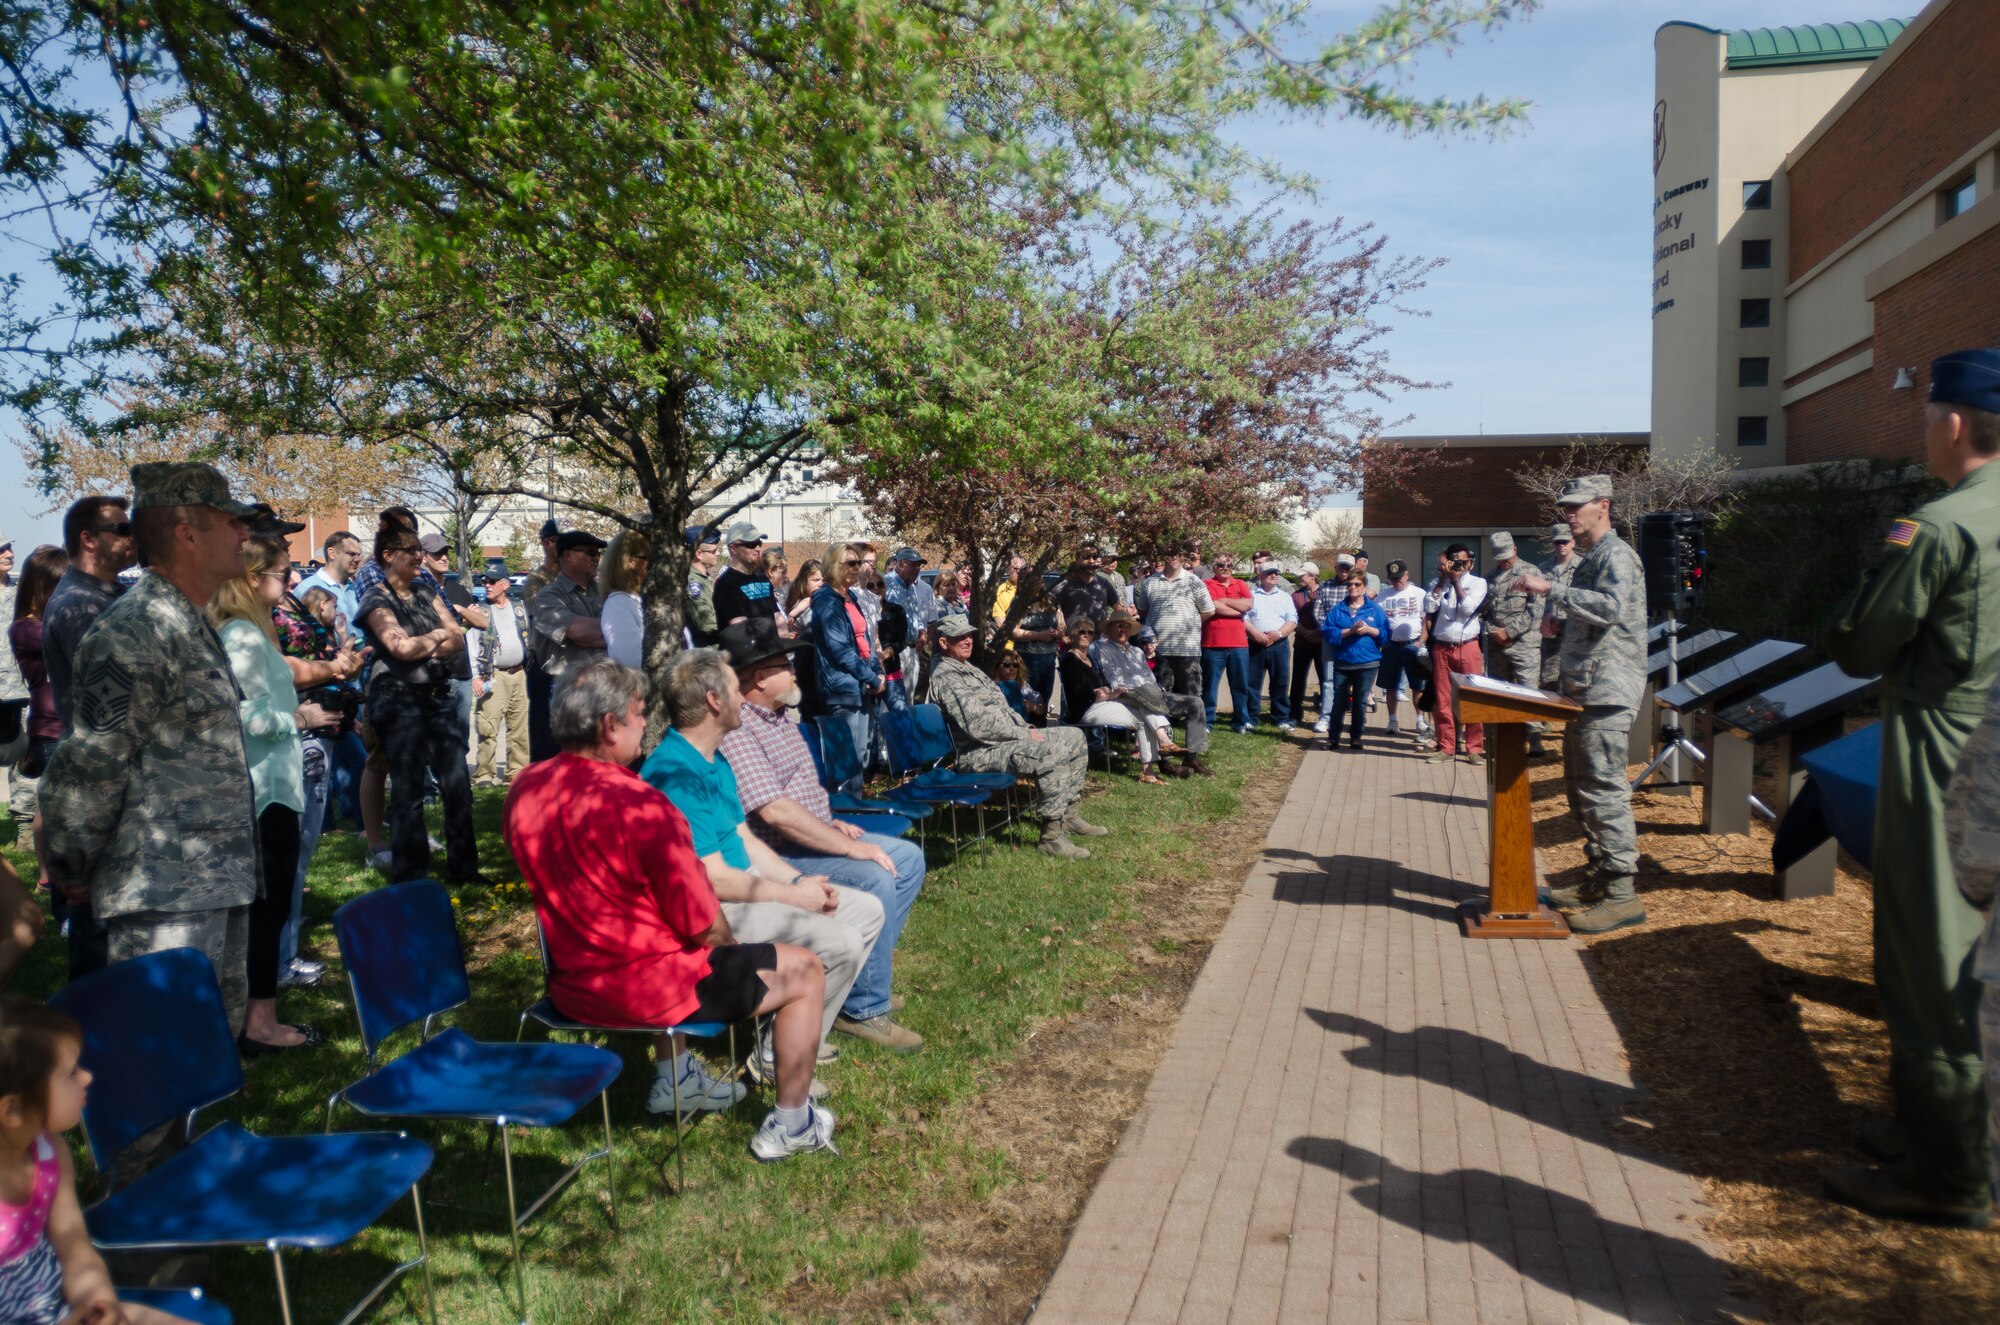 A ceremony held at the Kentucky Air National Guard Base in Louisville, Ky., April 12, 2014, honored more than 40 Kentucky Air National Guardsmen who retired from the unit in 2013. The retirees' names are inscribed on two marble tablets that were unveiled during the ceremony. (U.S. Air National Guard photo by Airman 1st Class Joshua Horton)